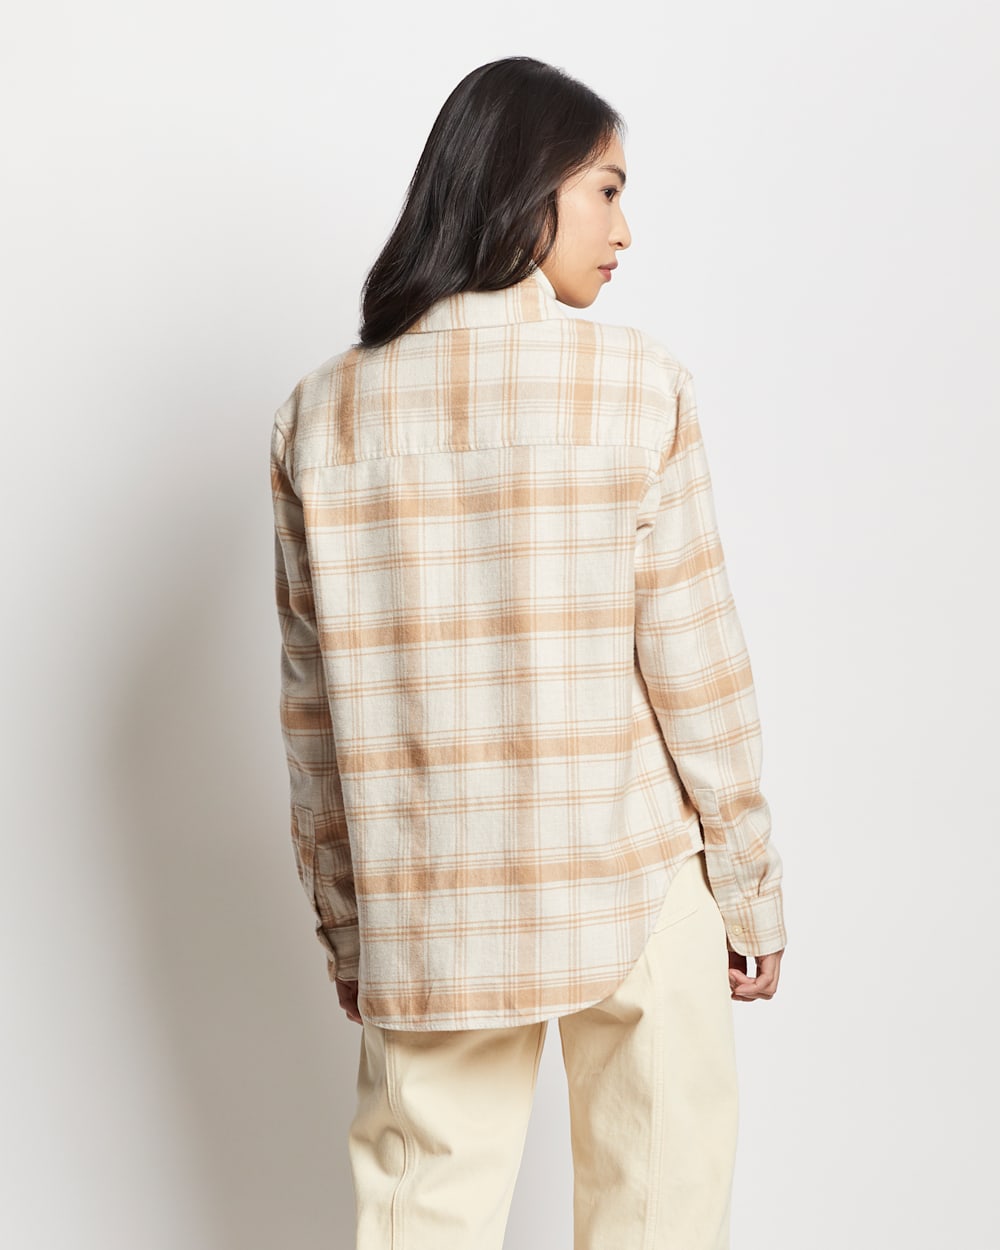 ALTERNATE VIEW OF WOMEN'S BOYFRIEND DOUBLEBRUSHED FLANNEL SHIRT IN IVORY/TAN PLAID image number 4